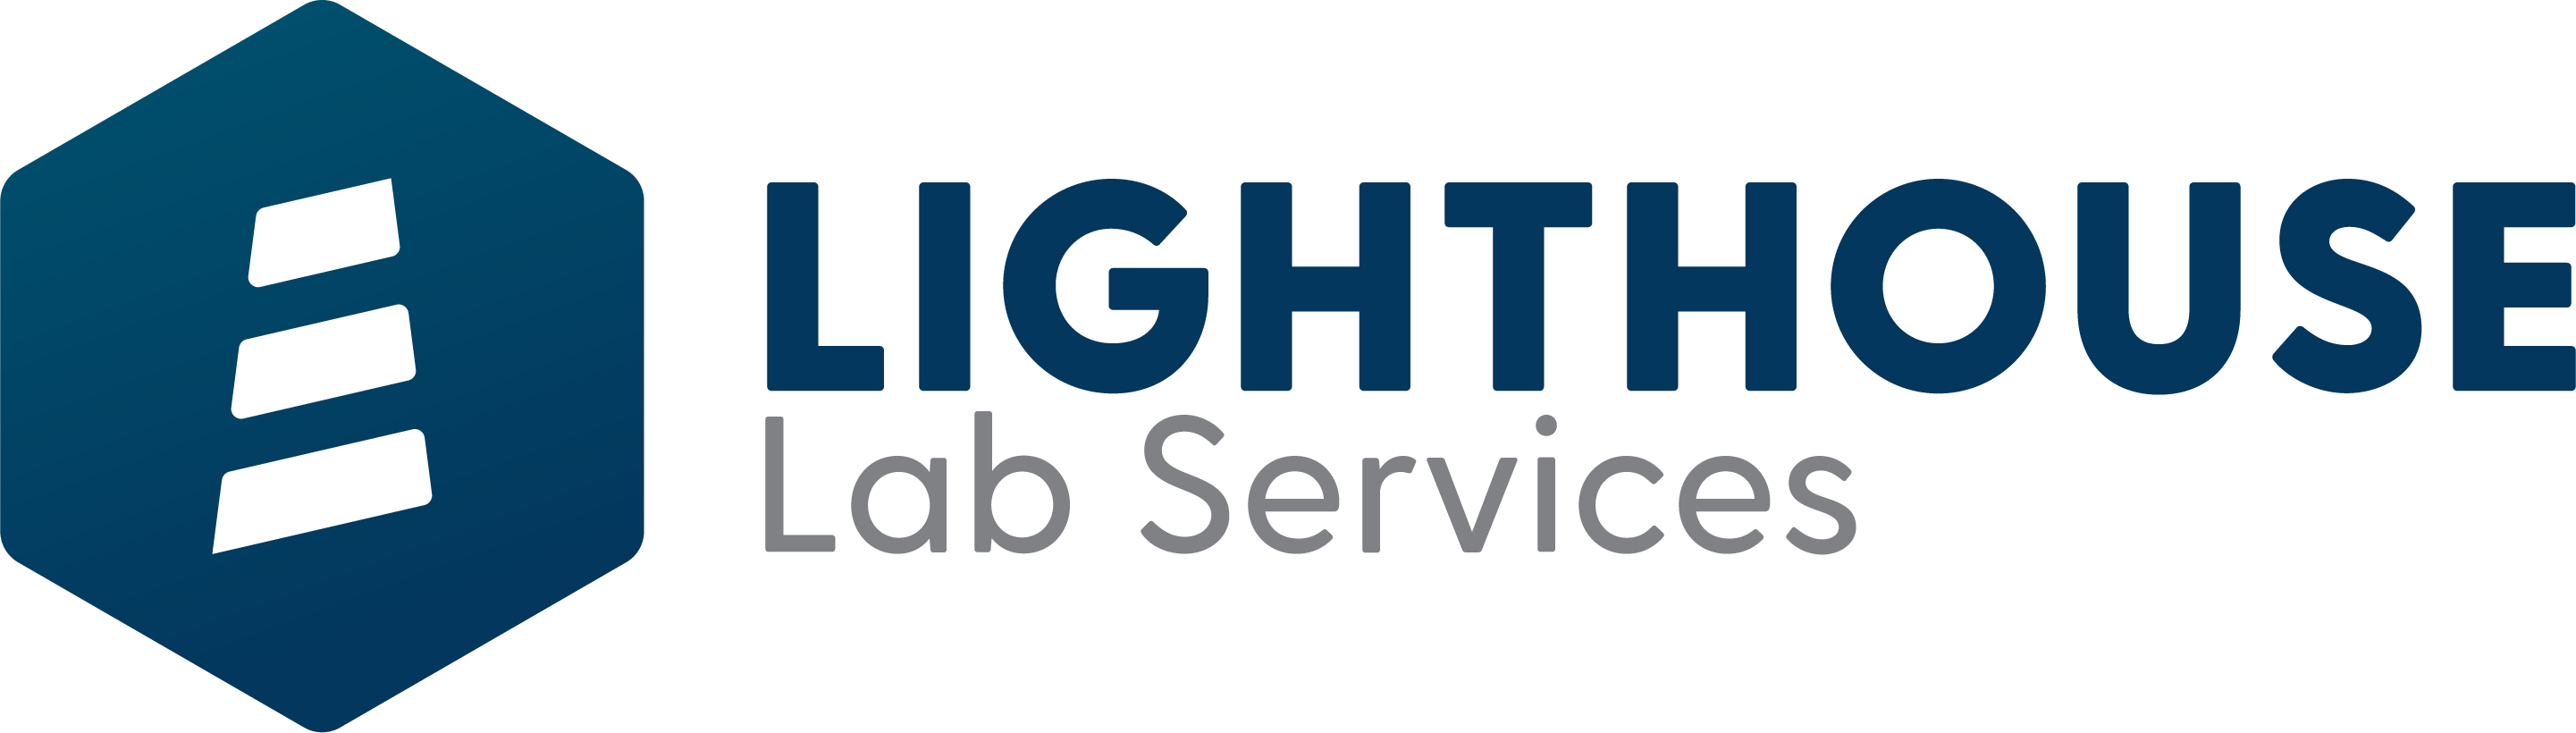 Lighthouse Labs Logo_NEW